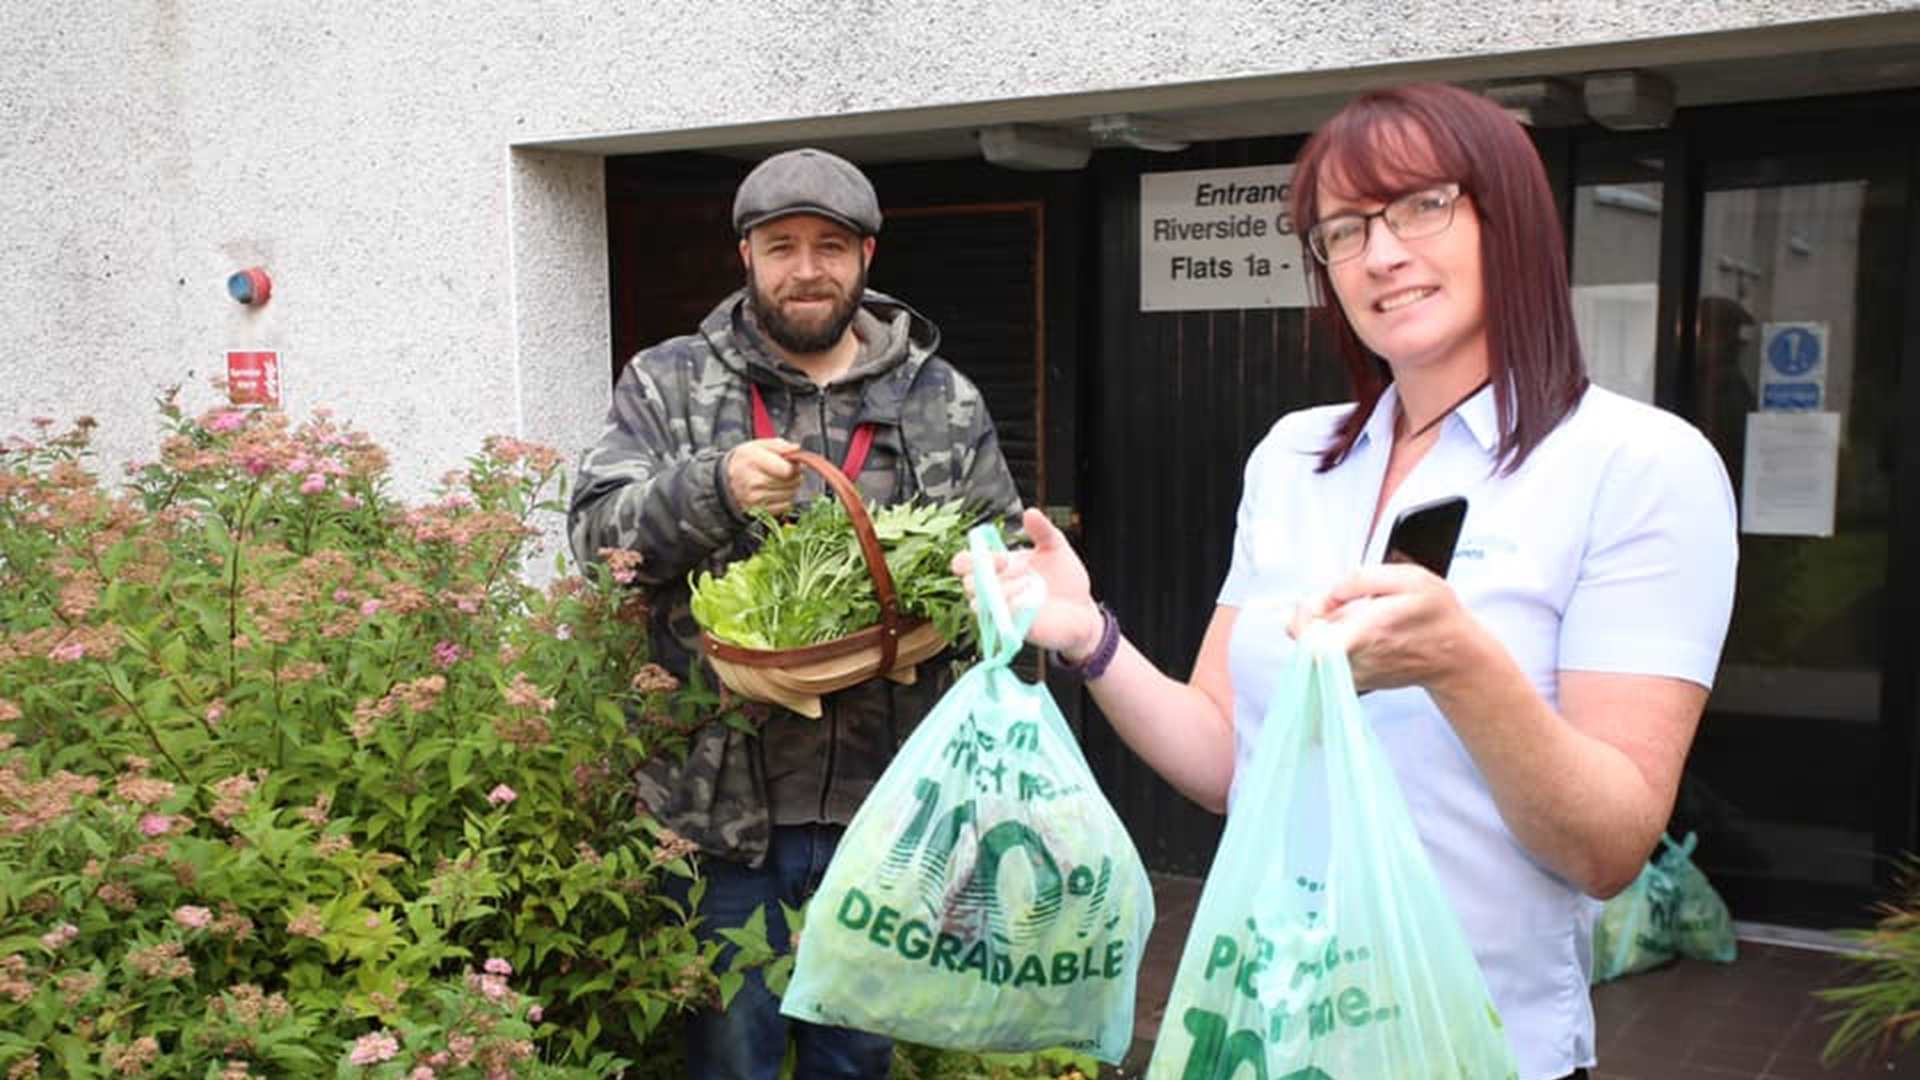 A man and woman receiving a food and plant delivery